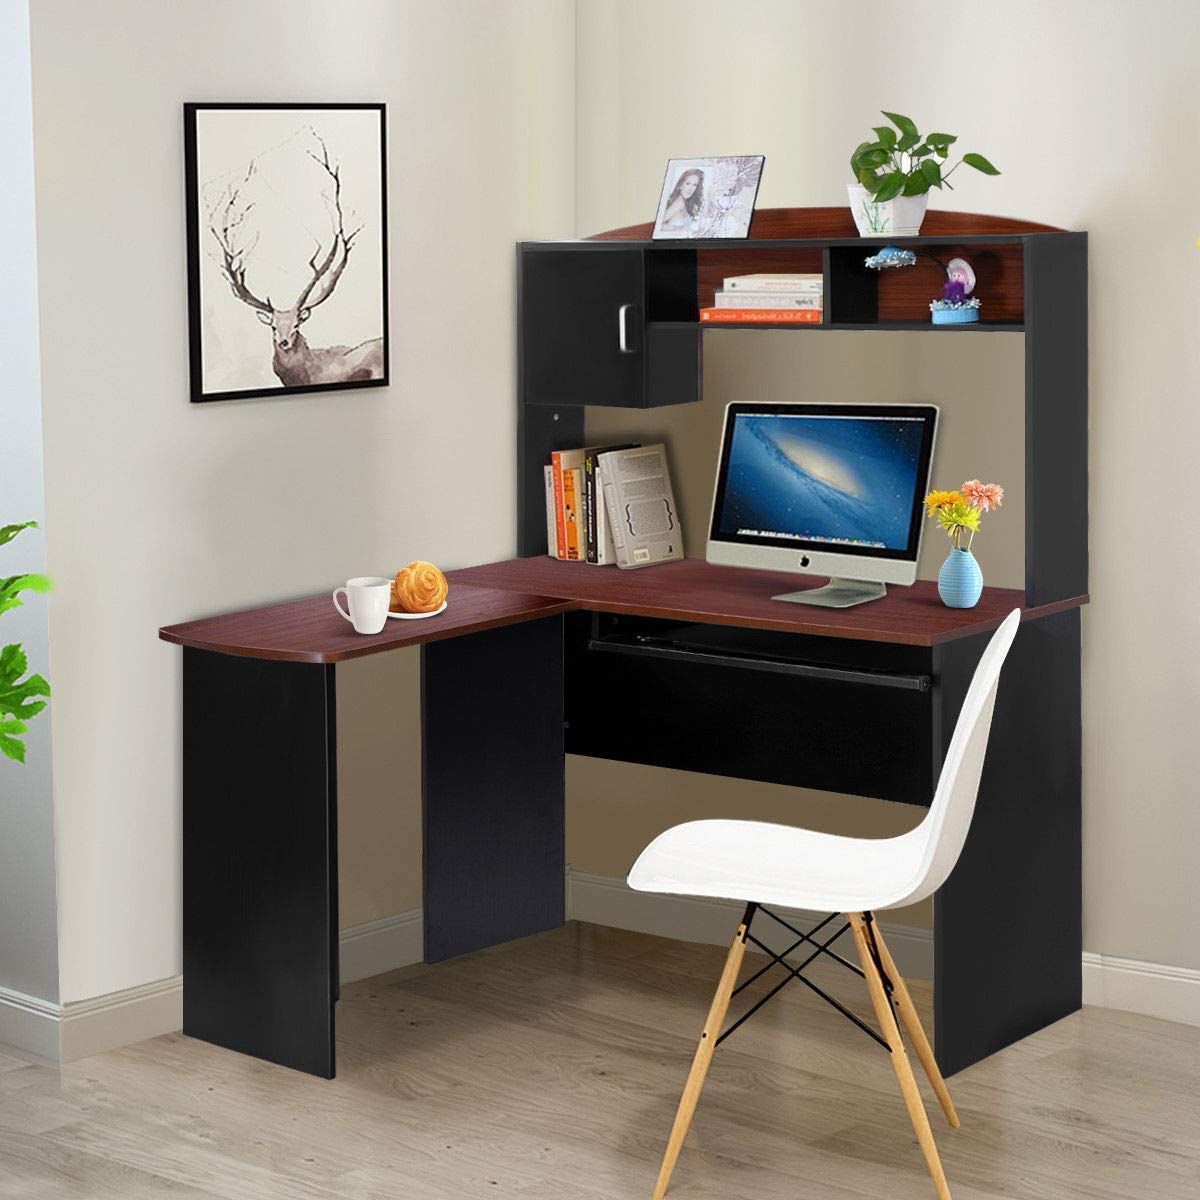 Best And Newest Buy L Shaped Computer Desk With Keyboard Tray Storage Drawer And Shelf In Corner Desks With Keyboard Shelf (View 3 of 15)